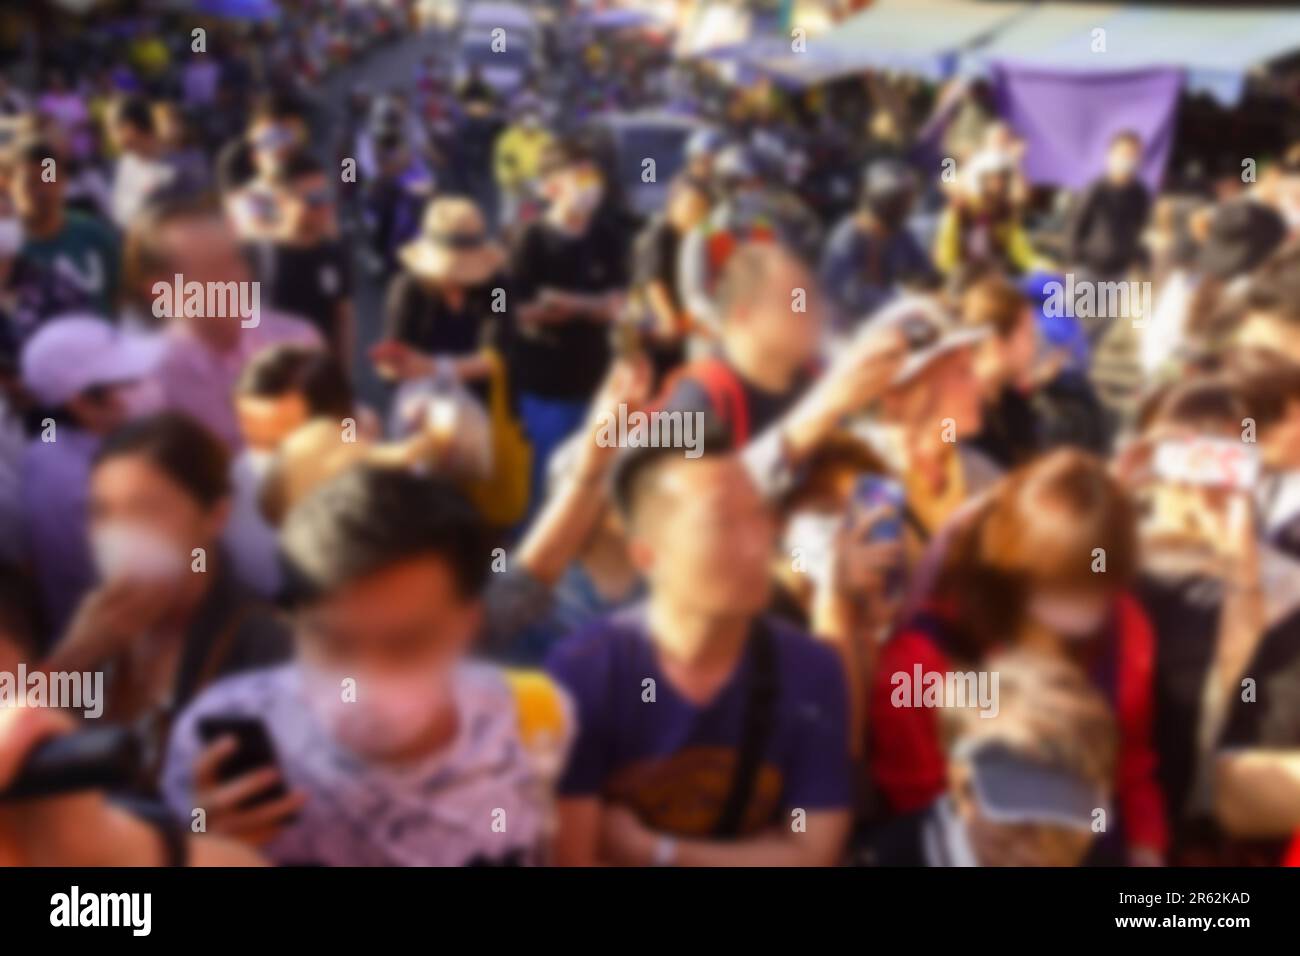 A crowd of people in the conditions of coronavirus. Non-compliance with personal infectious safety measures in most cases. Southeast Asia. Blurred unr Stock Photo